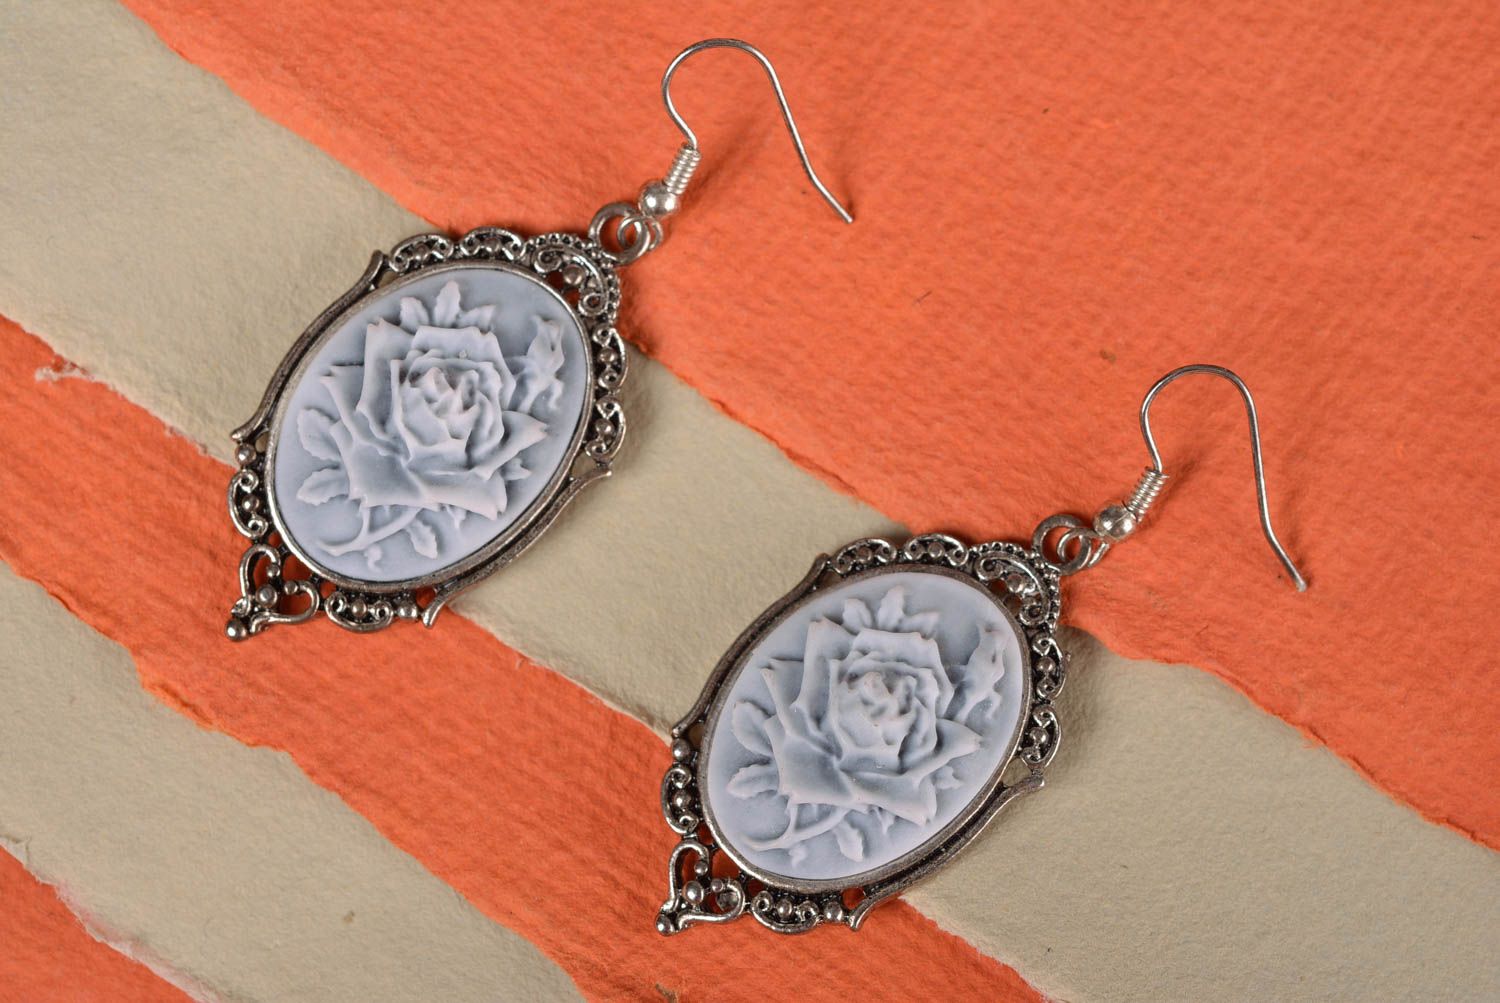 Handmade stylish earrings with cameos charms made of polymer clay and metal  photo 1